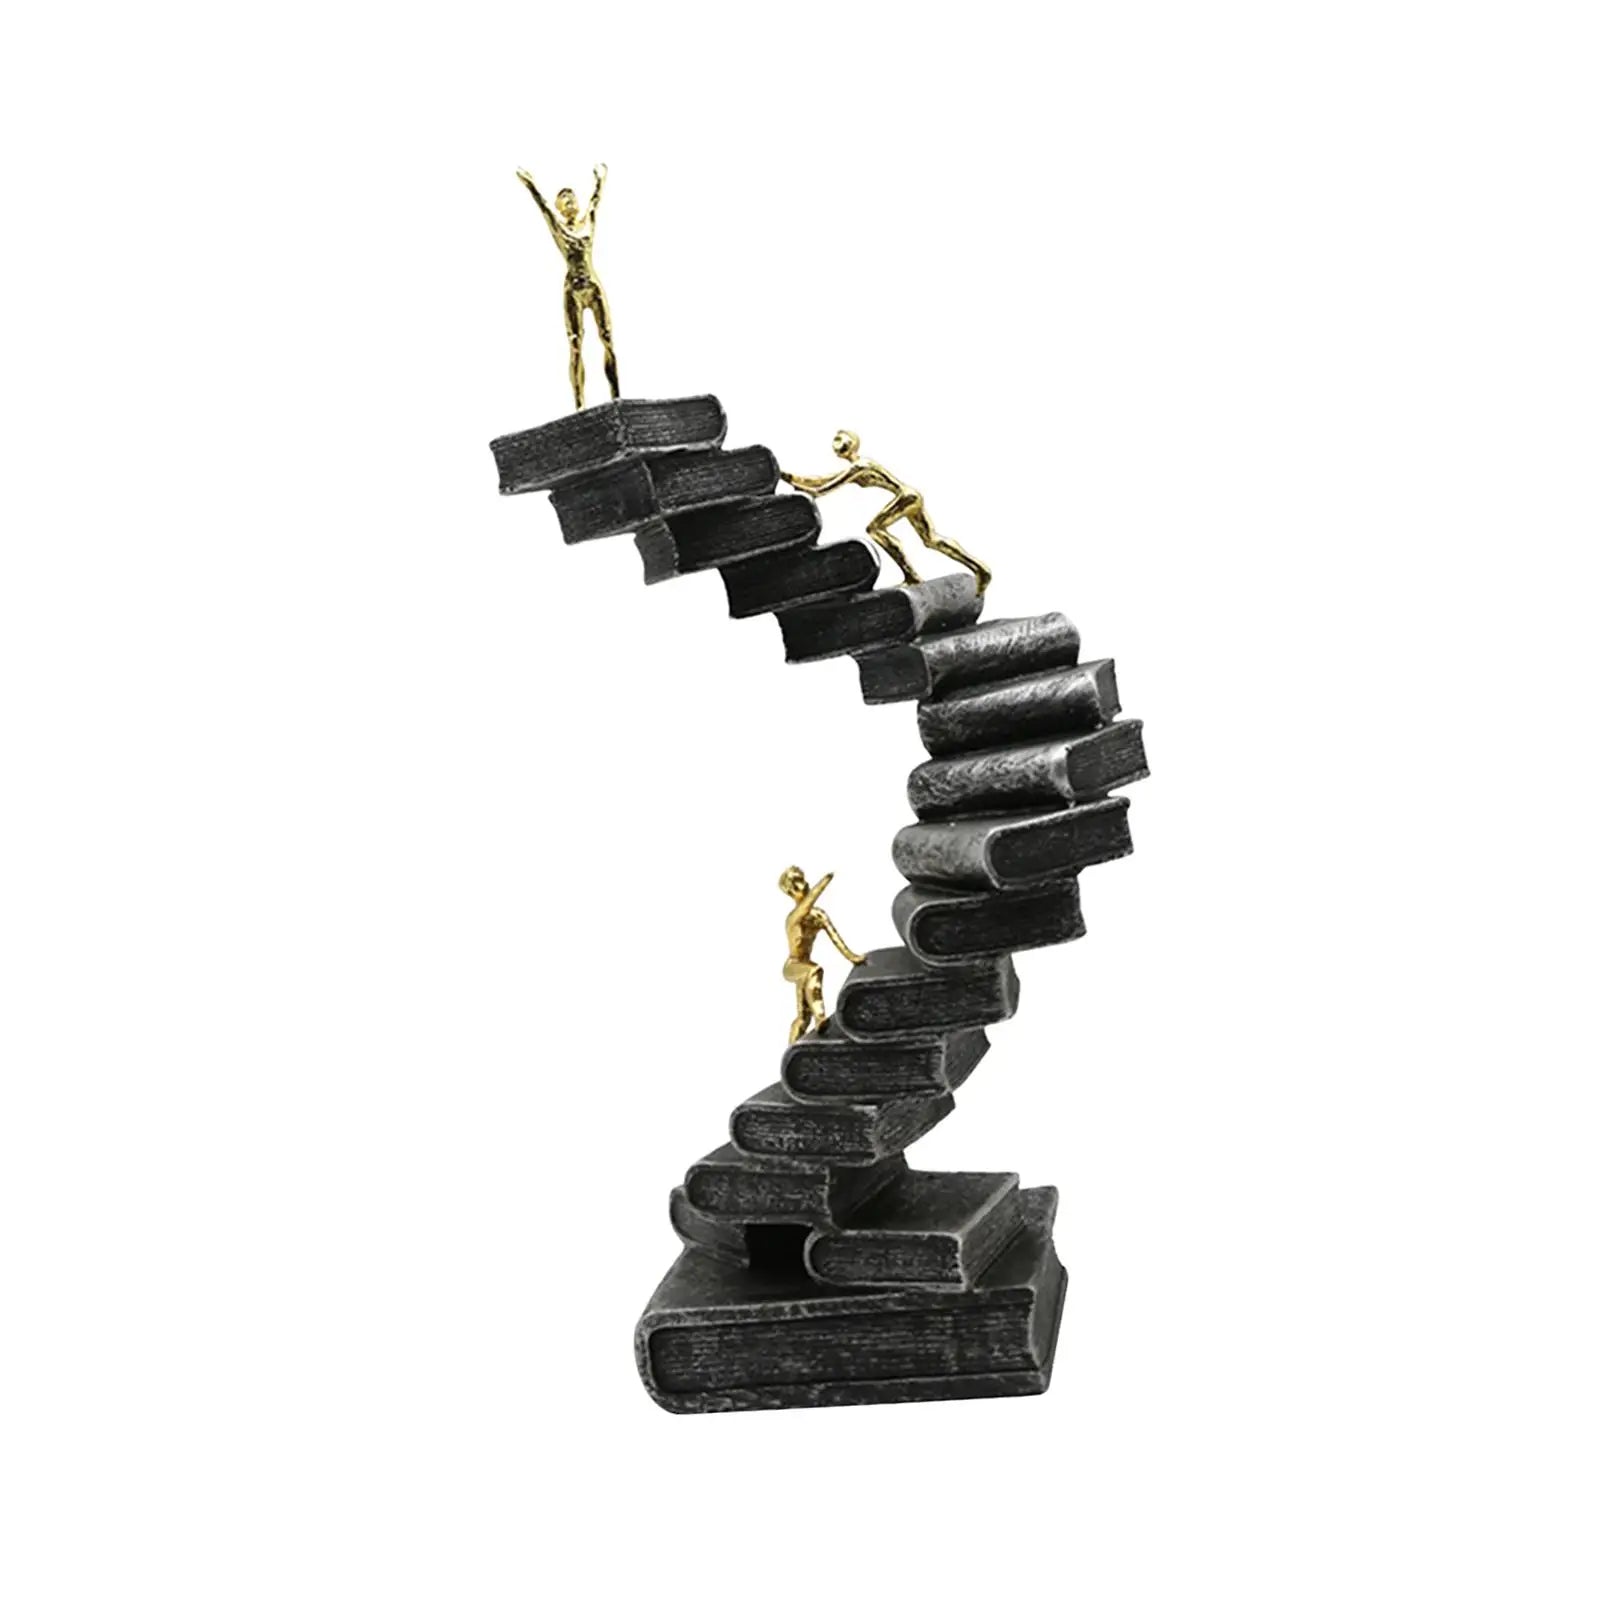 Ladder Sculpture Resin Collectible Statue Art Thinker Statues for Study Room Living Room Desktop Mantelpiece Abstract Figure